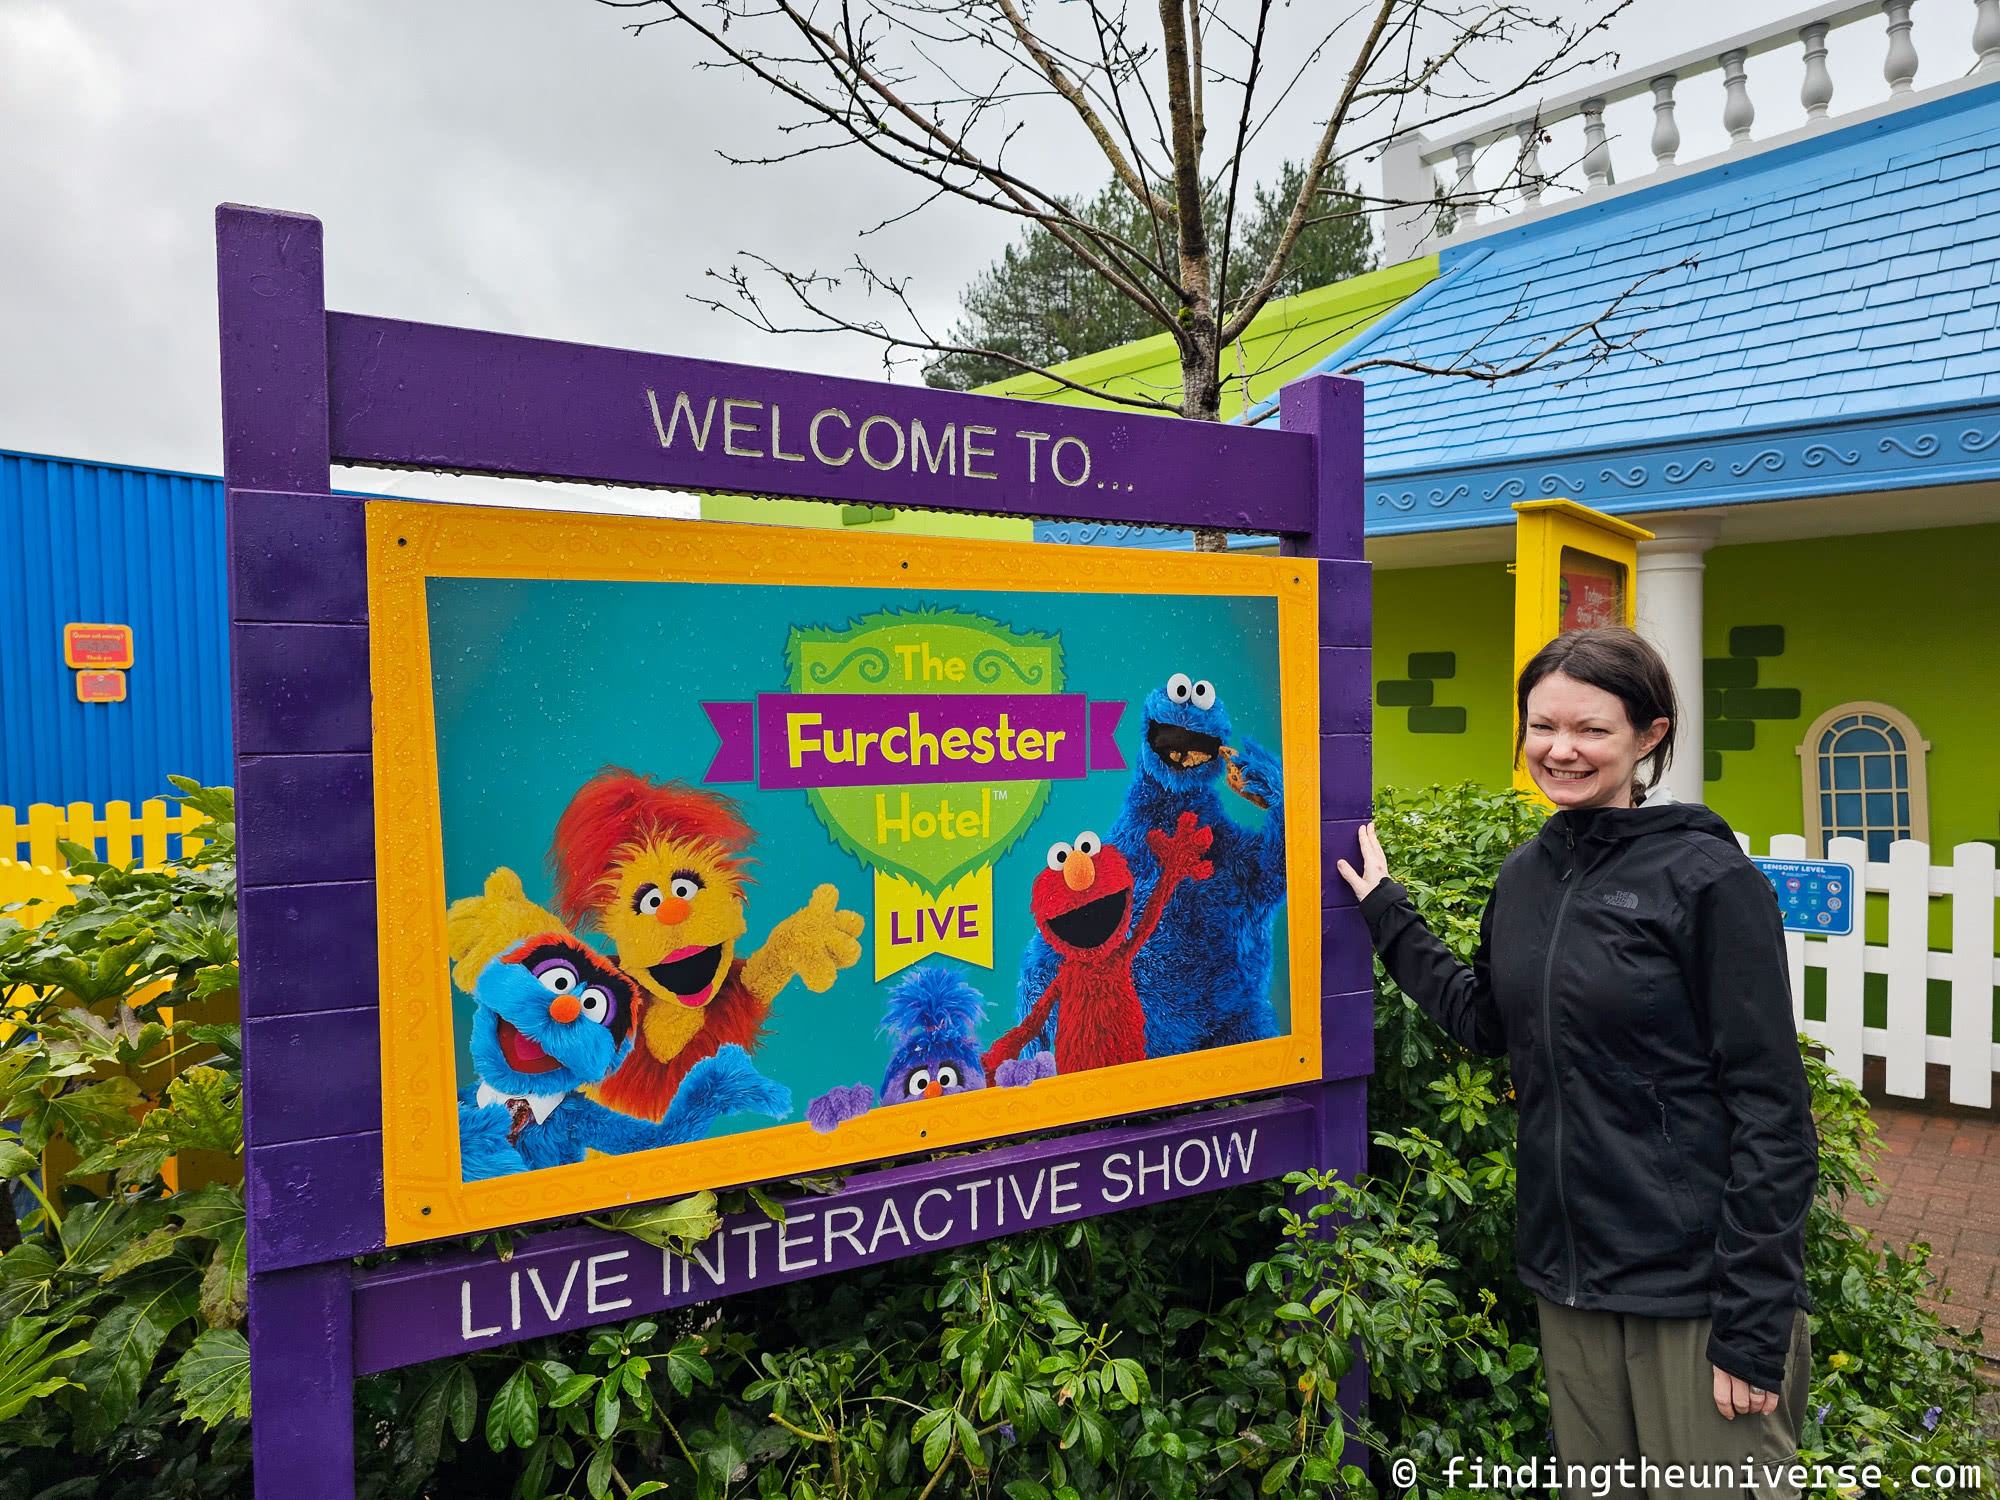 Furchester hotel live Alton Towers by Laurence Norah-2